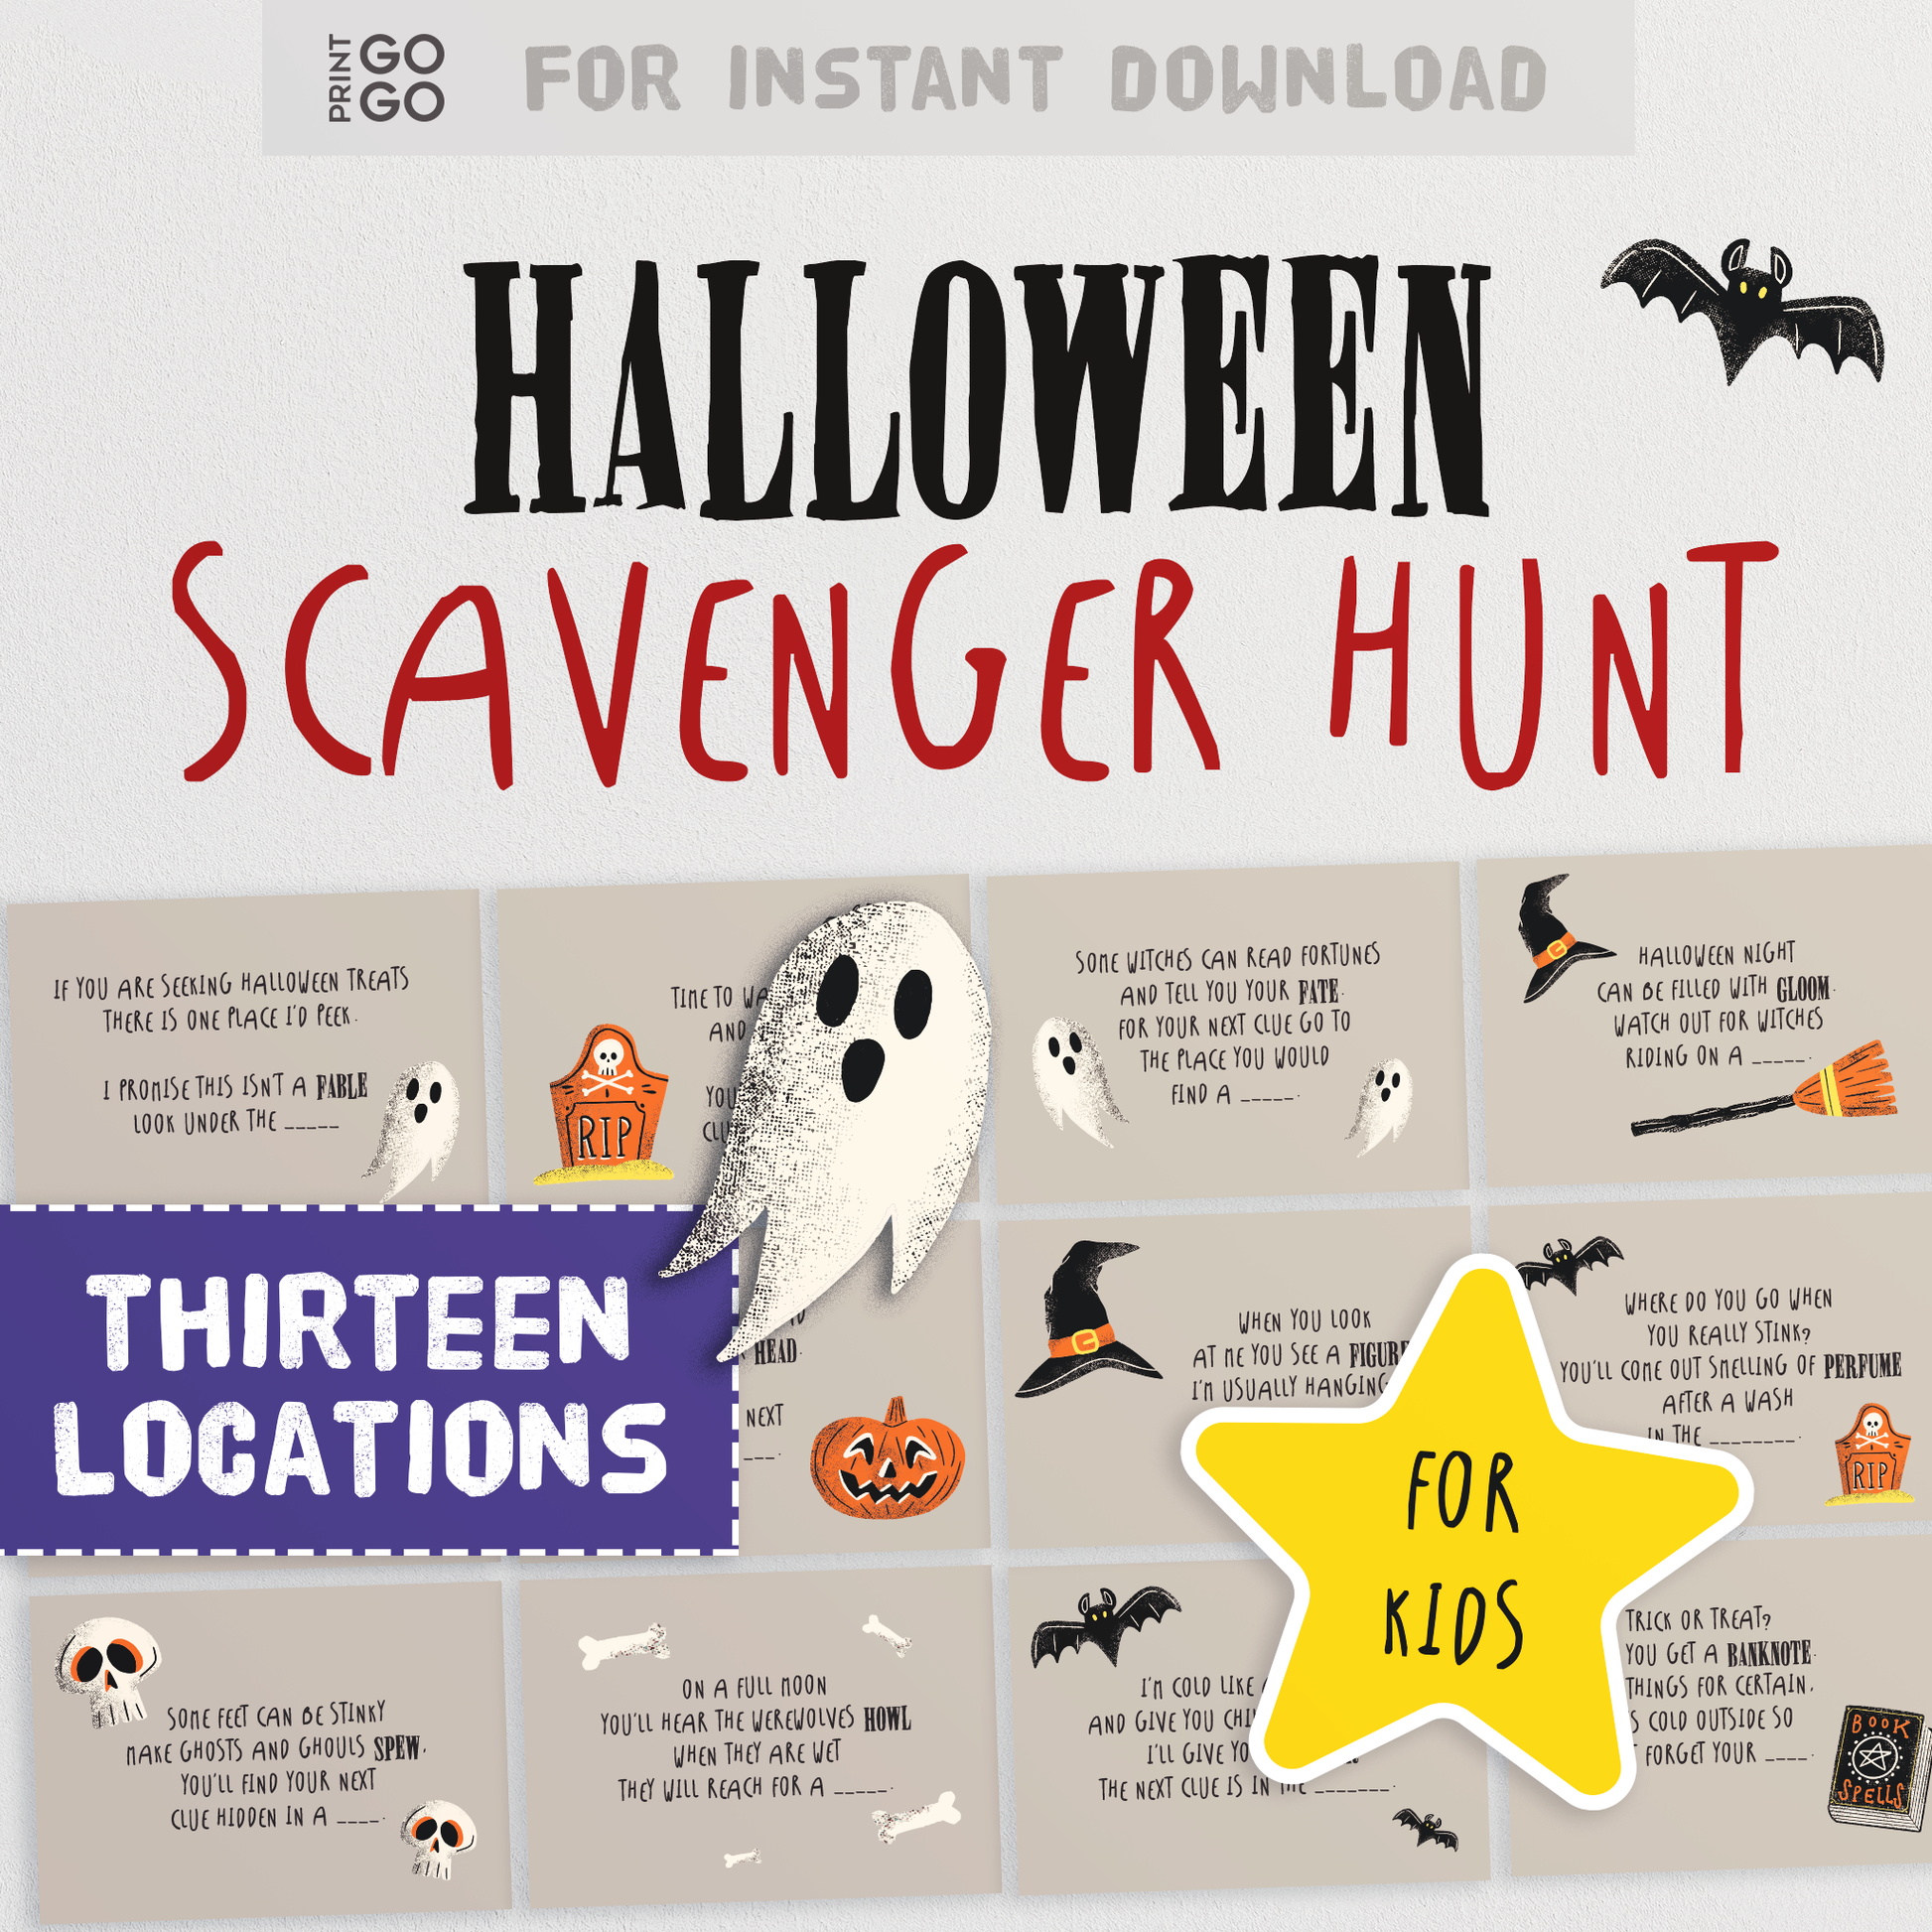 Halloween Scavenger Hunt Bundle for Kids | 27 Spooky Riddle Clue Cards for Use Indoors and Outside | Fun Trick-or-Treat Alternative Ideas